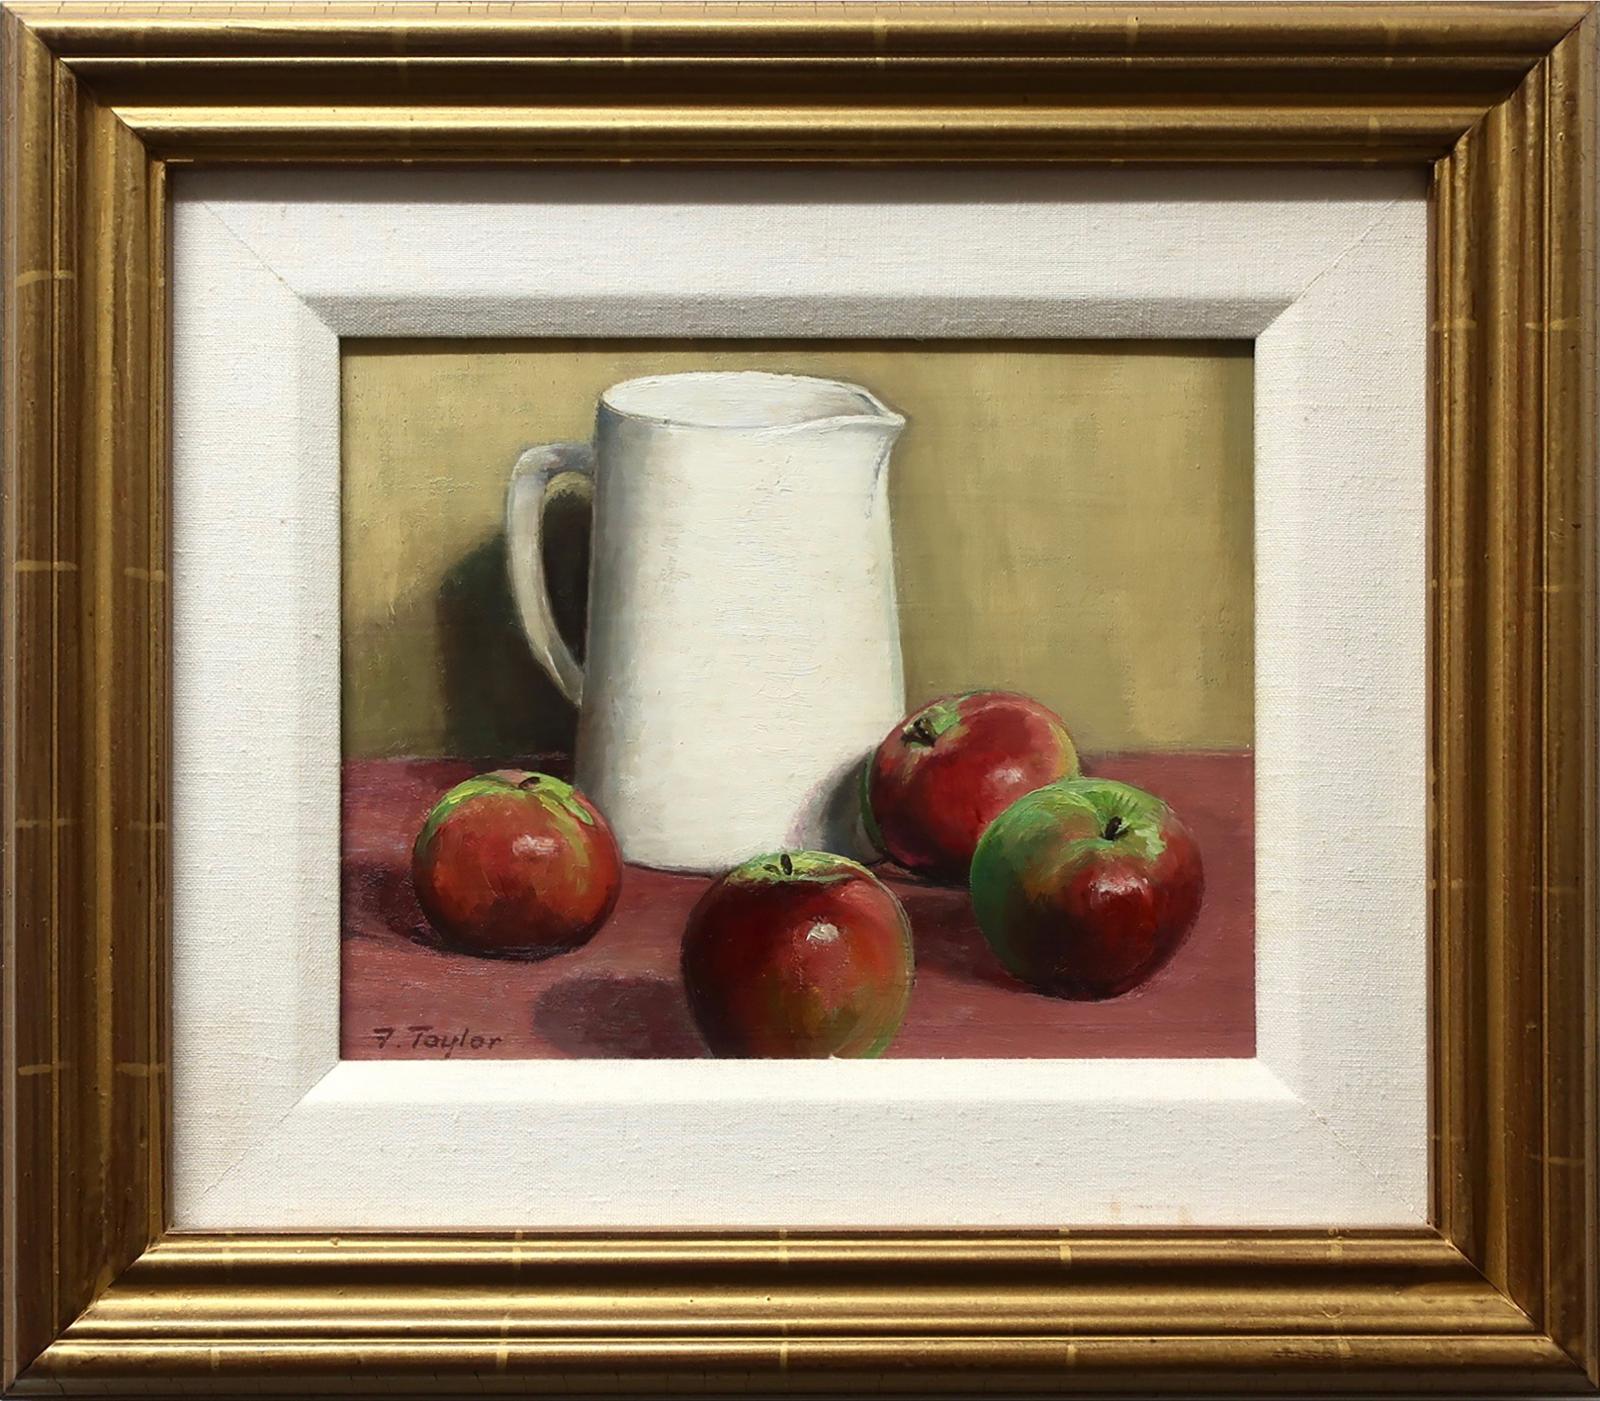 Frederick Bourchier Taylor (1906-1987) - White Jug & Four Apples